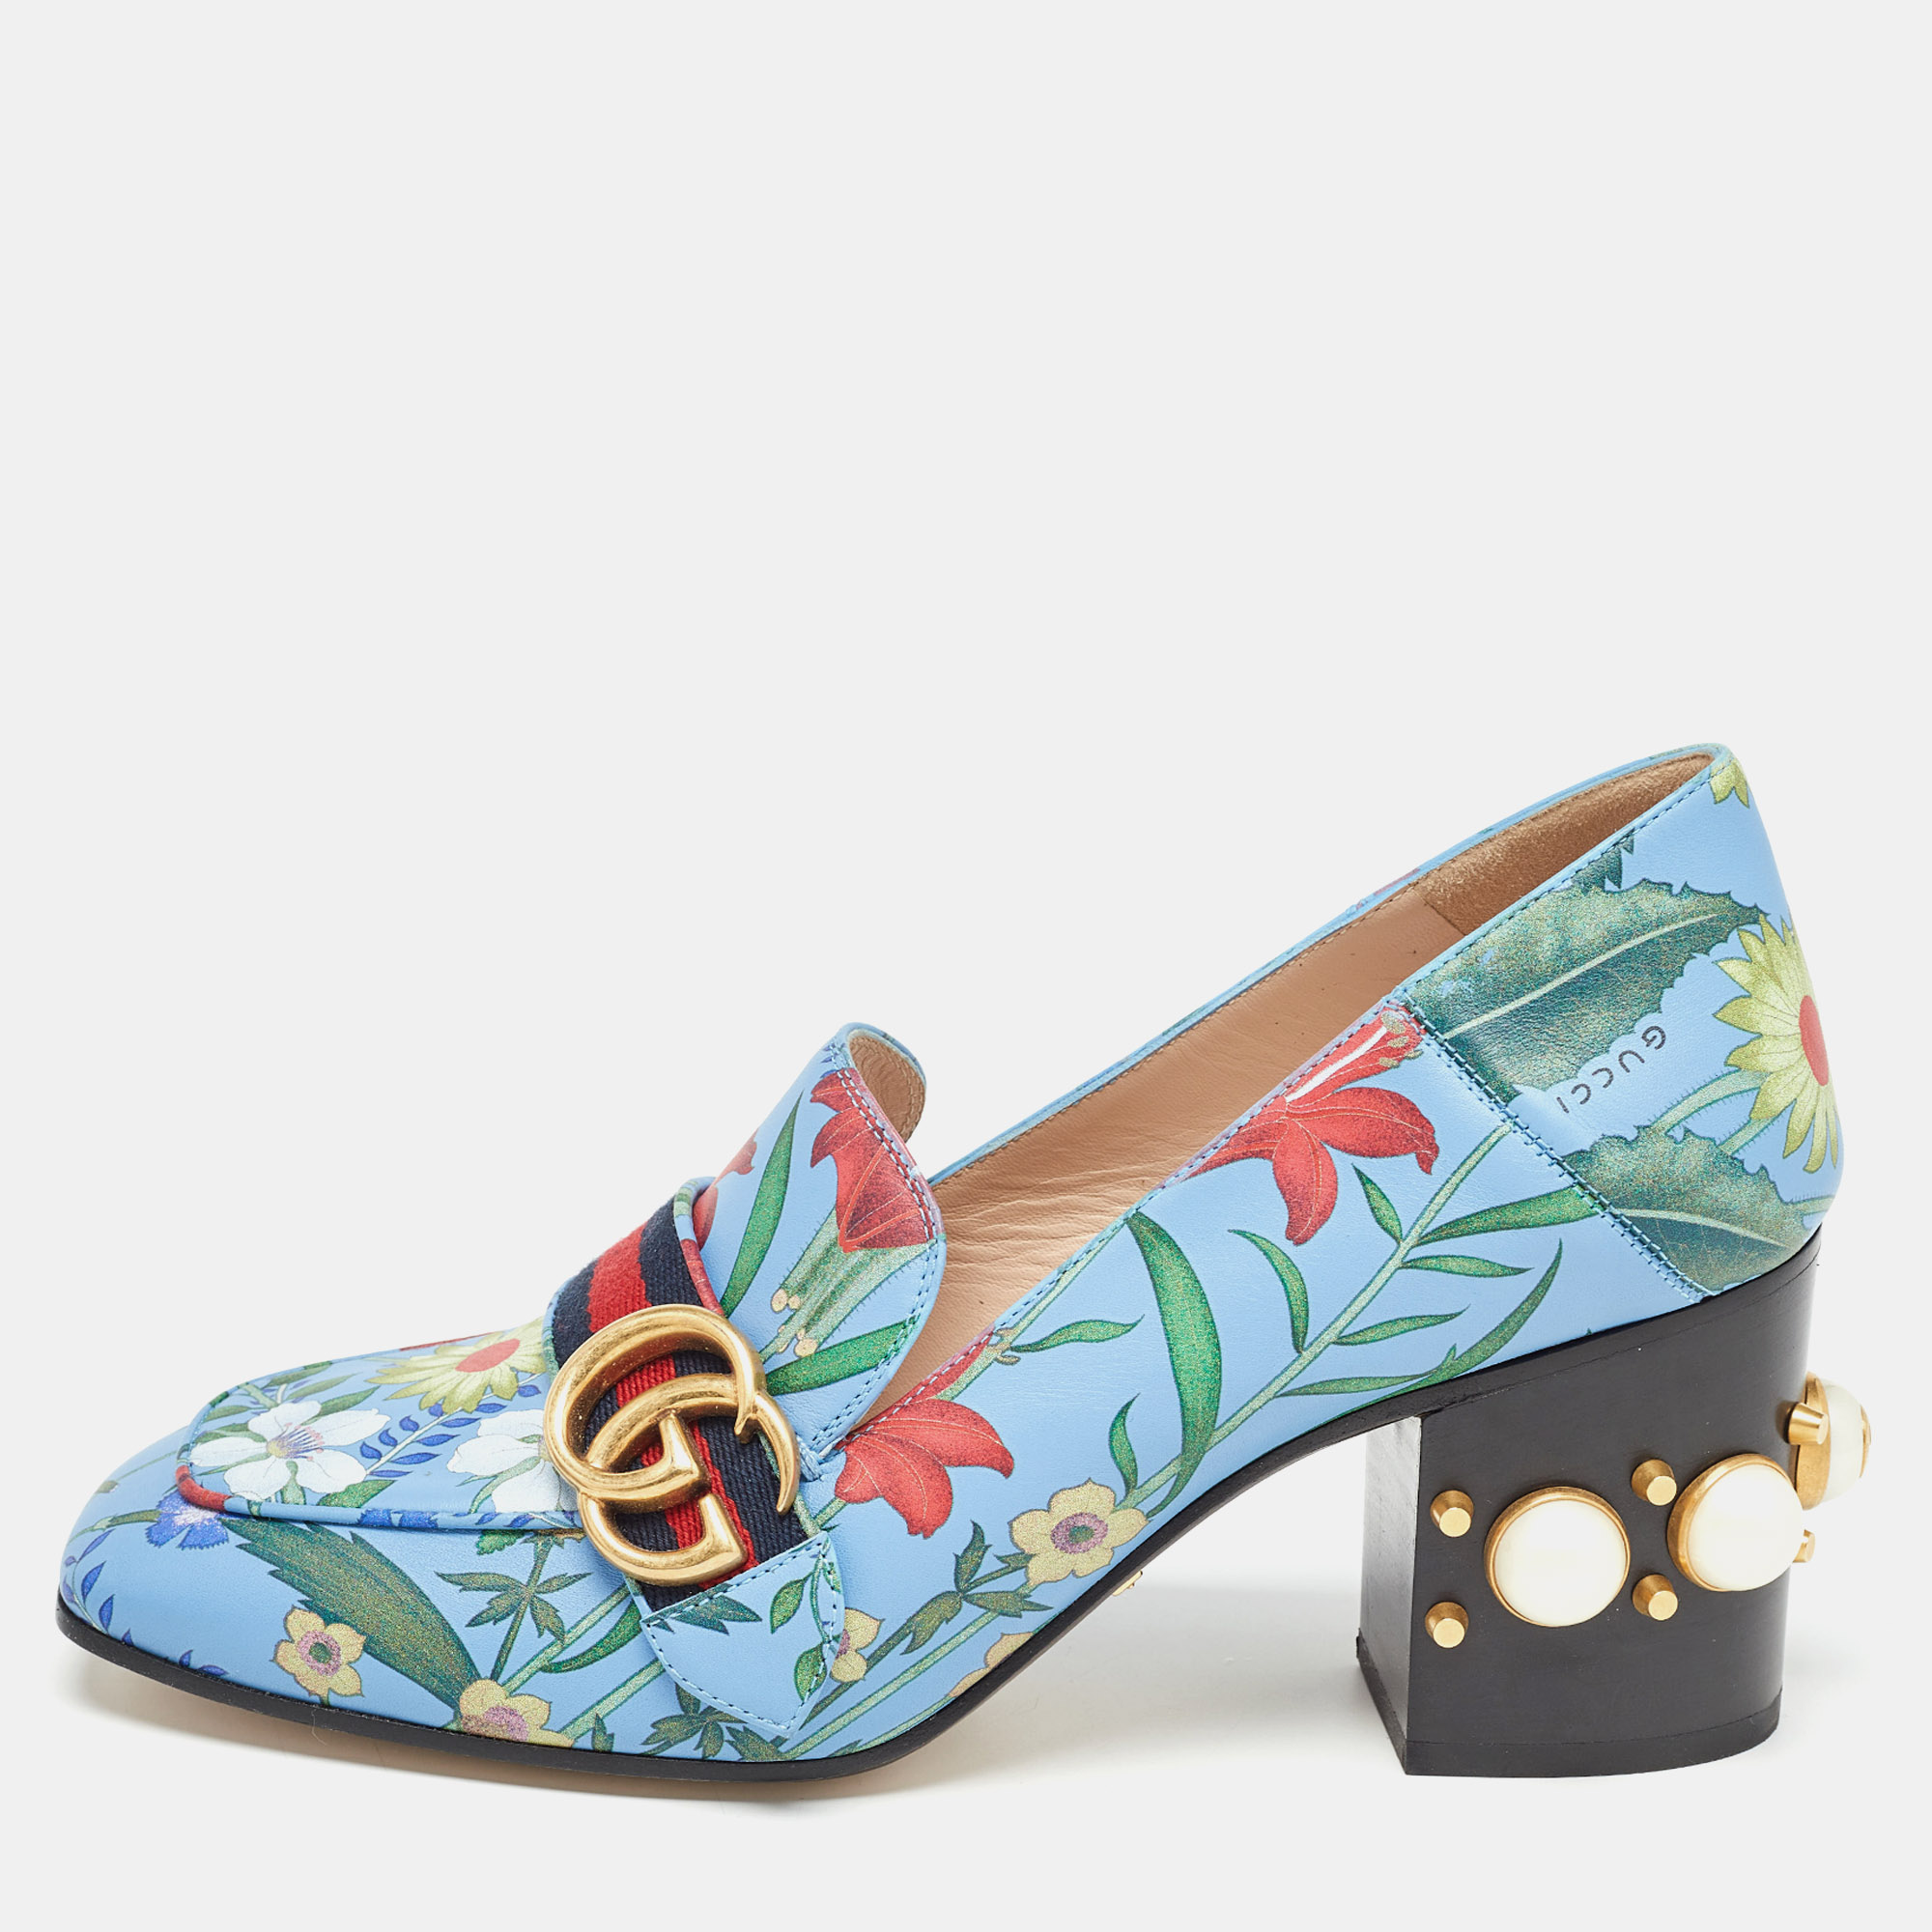 Gucci blue floral print leather gg marmont loafer pumps size 38.5